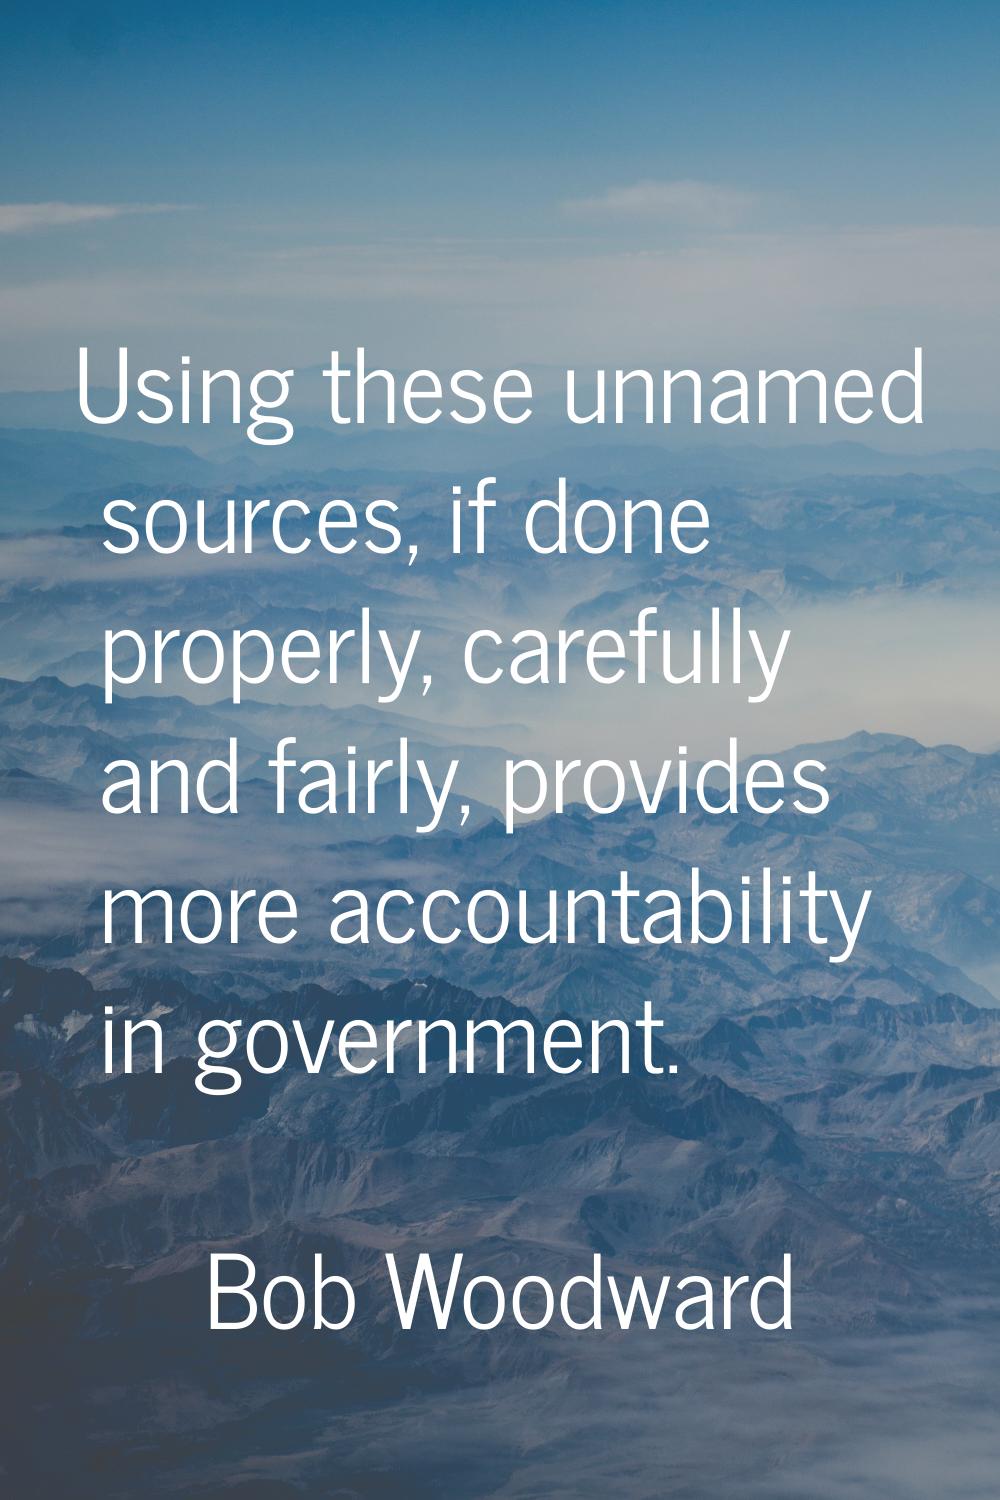 Using these unnamed sources, if done properly, carefully and fairly, provides more accountability i